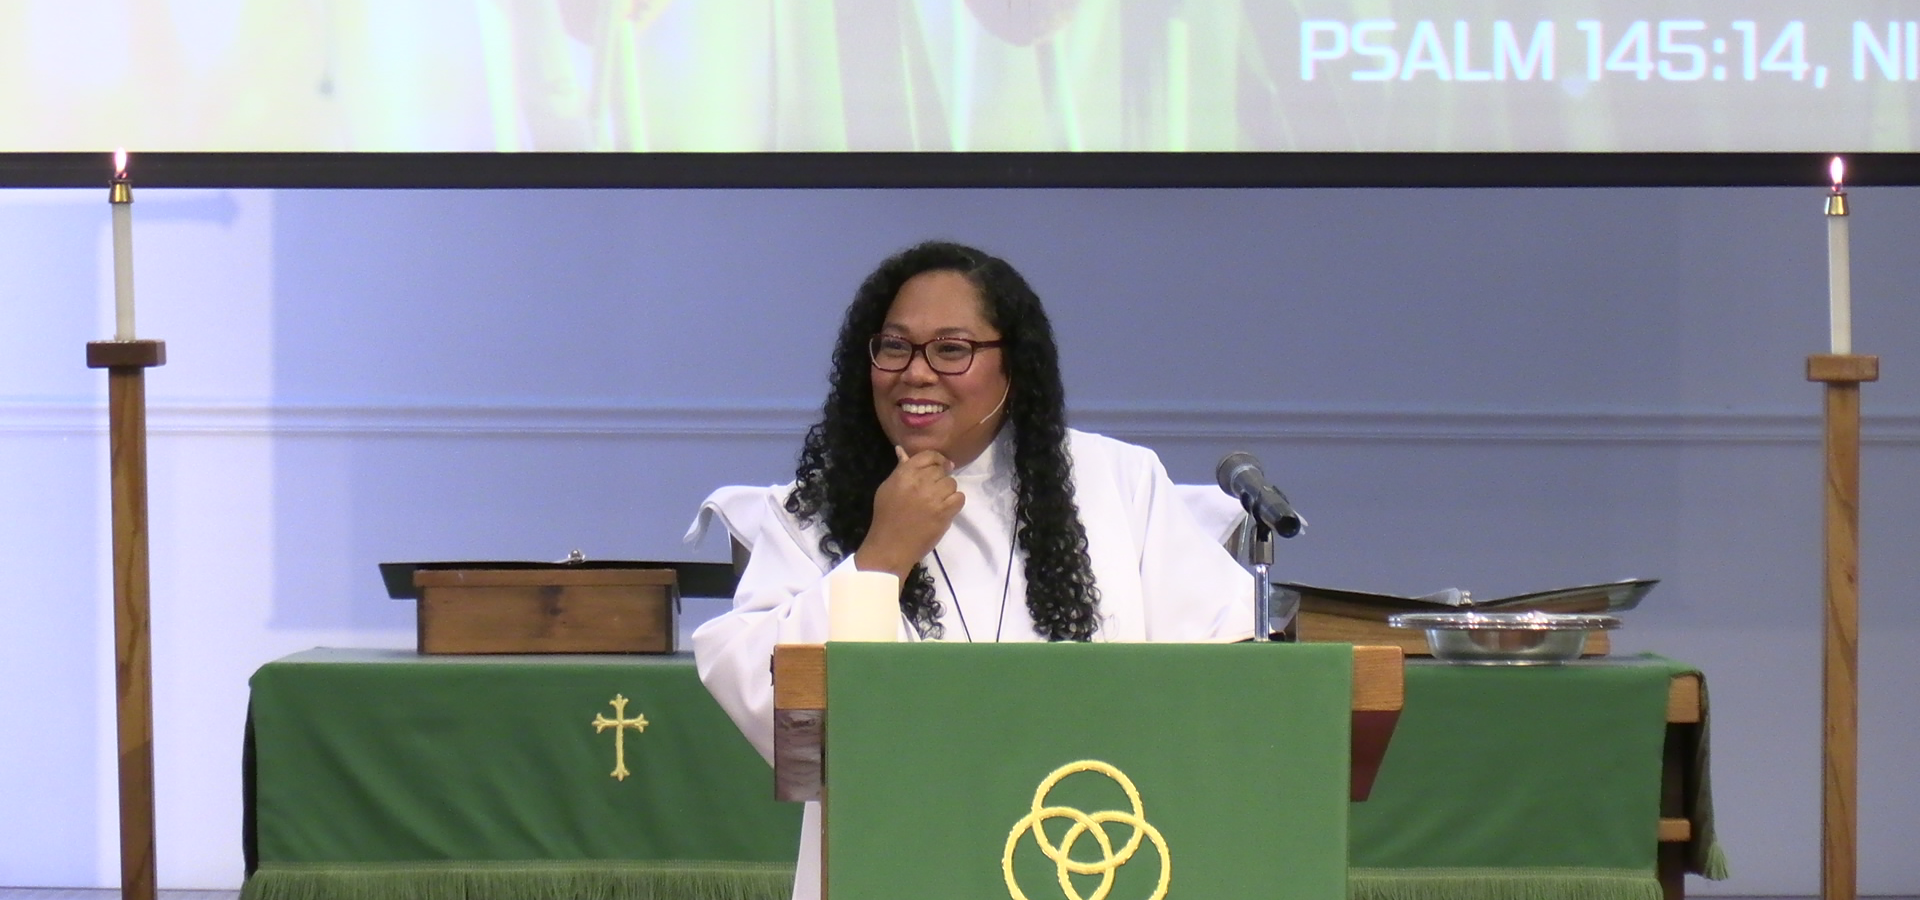 Pastor Antoinette preaches during a worship service